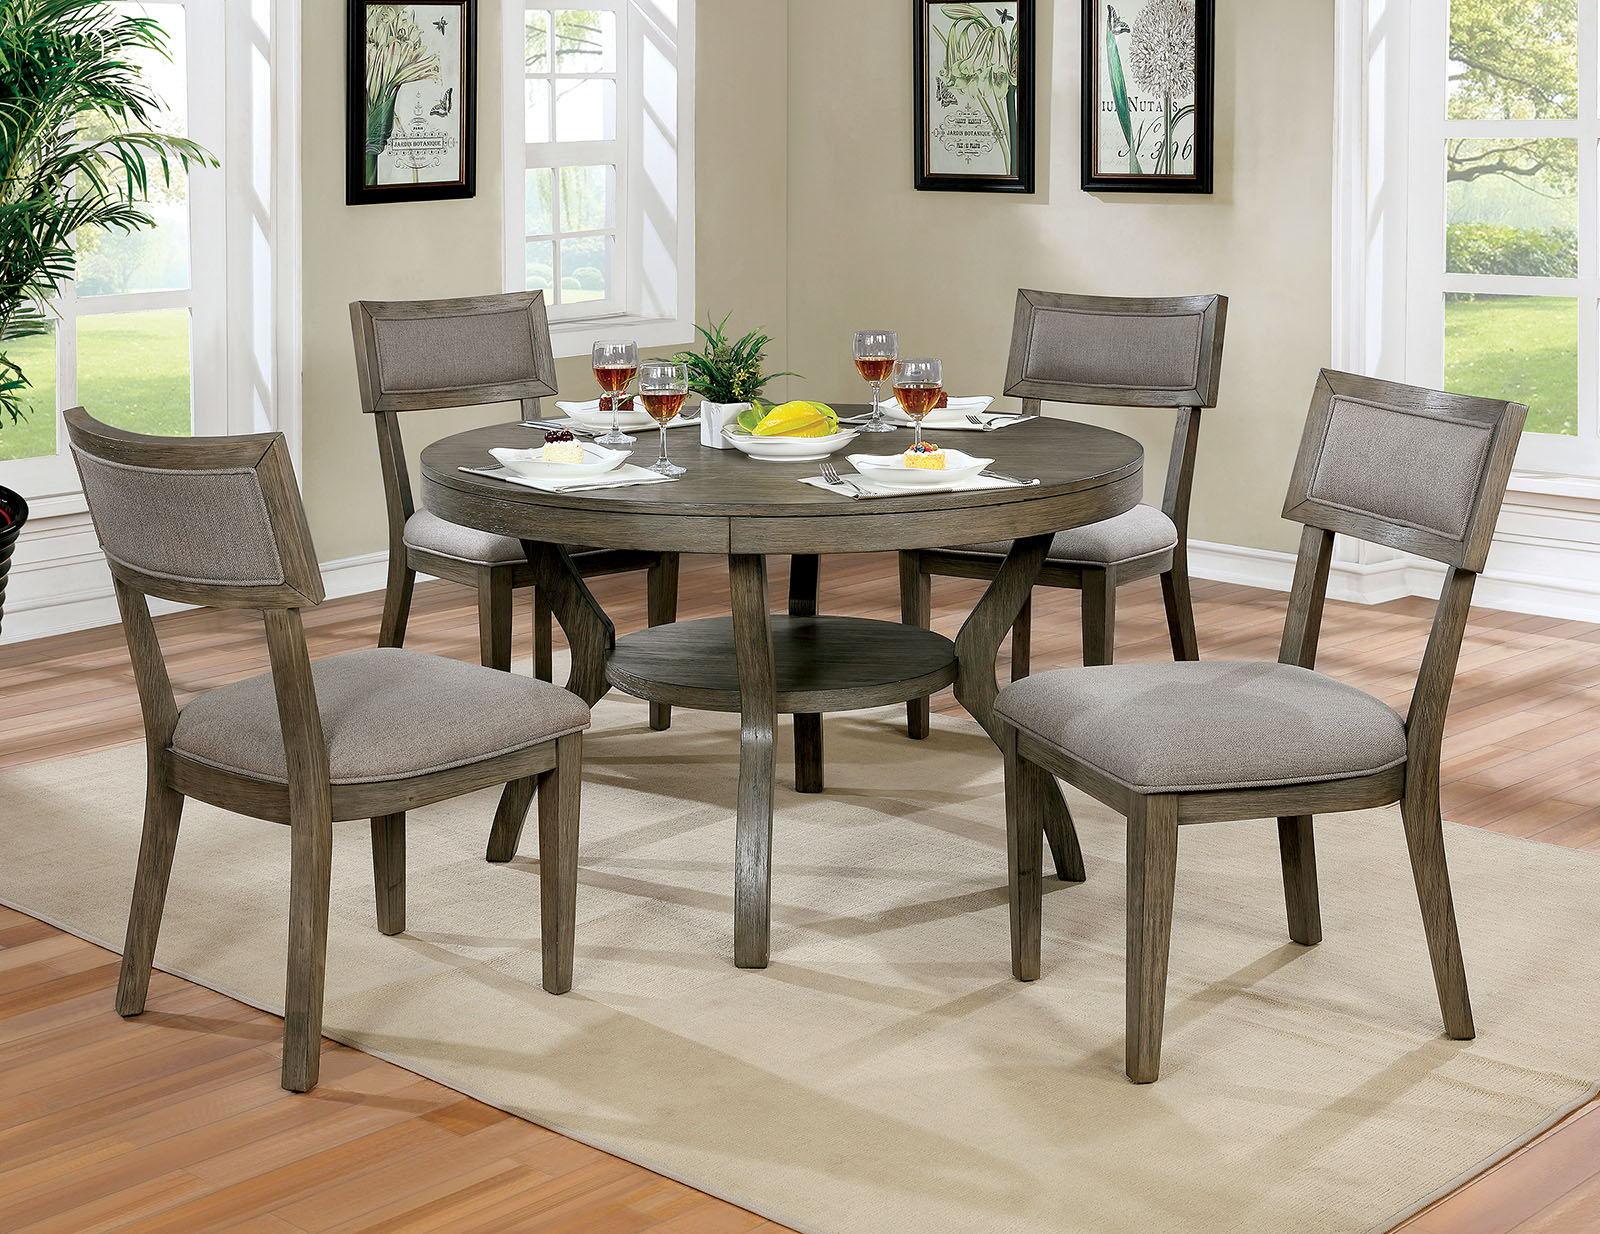 Furniture of America - Leeds - Round Dining Table - Gray - 5th Avenue Furniture